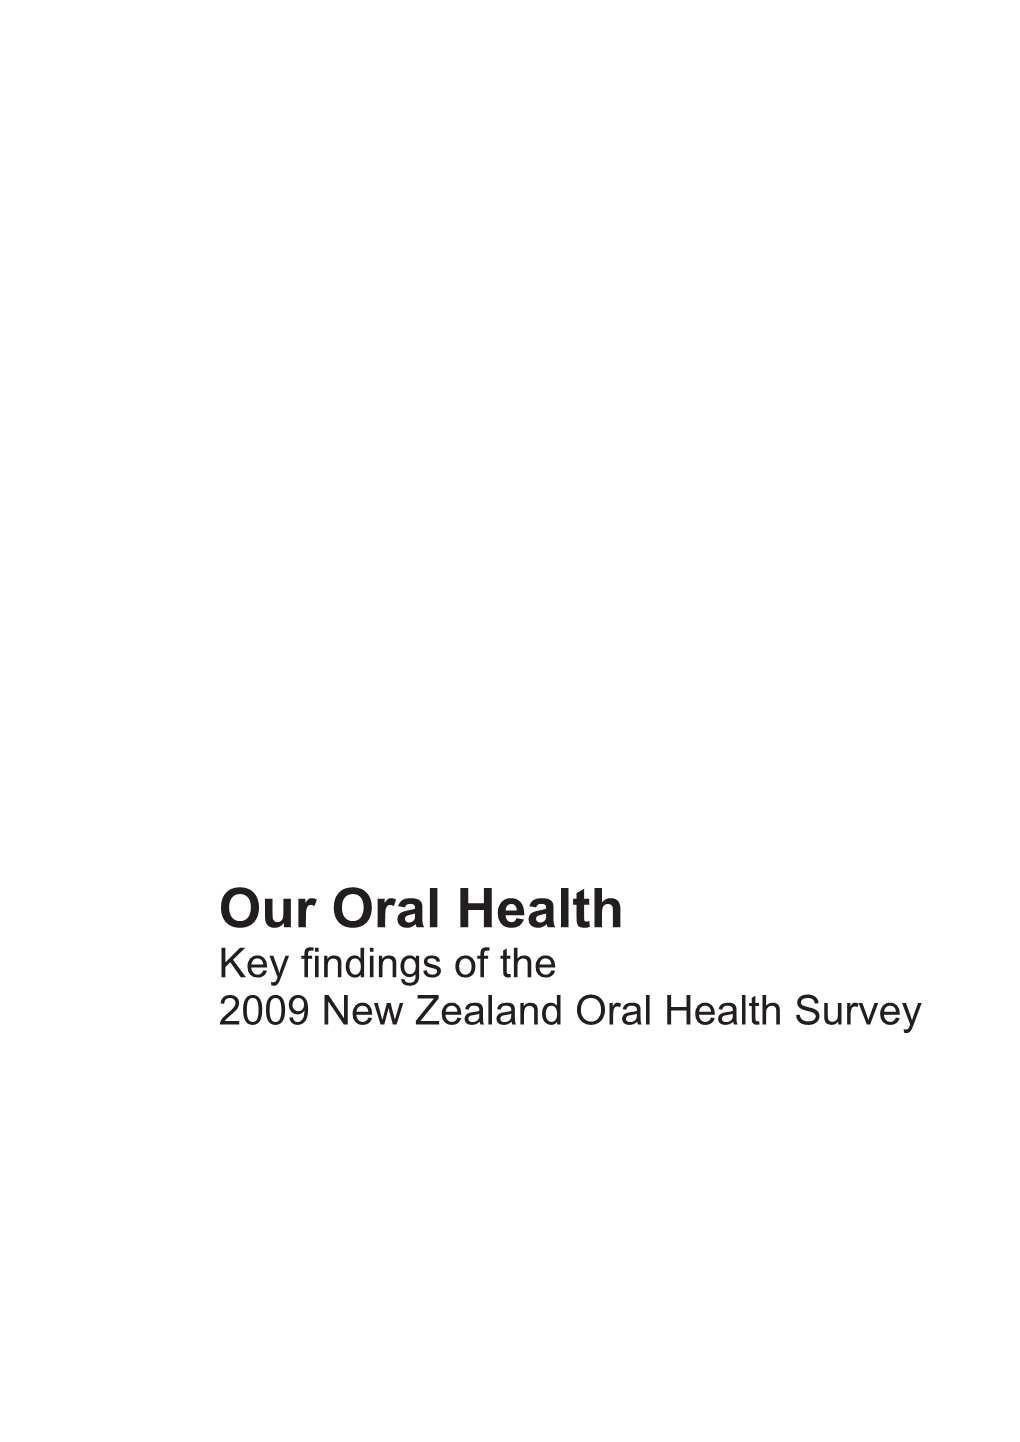 Key Findings of the 2009 New Zealand Oral Health Survey Ministry of Health